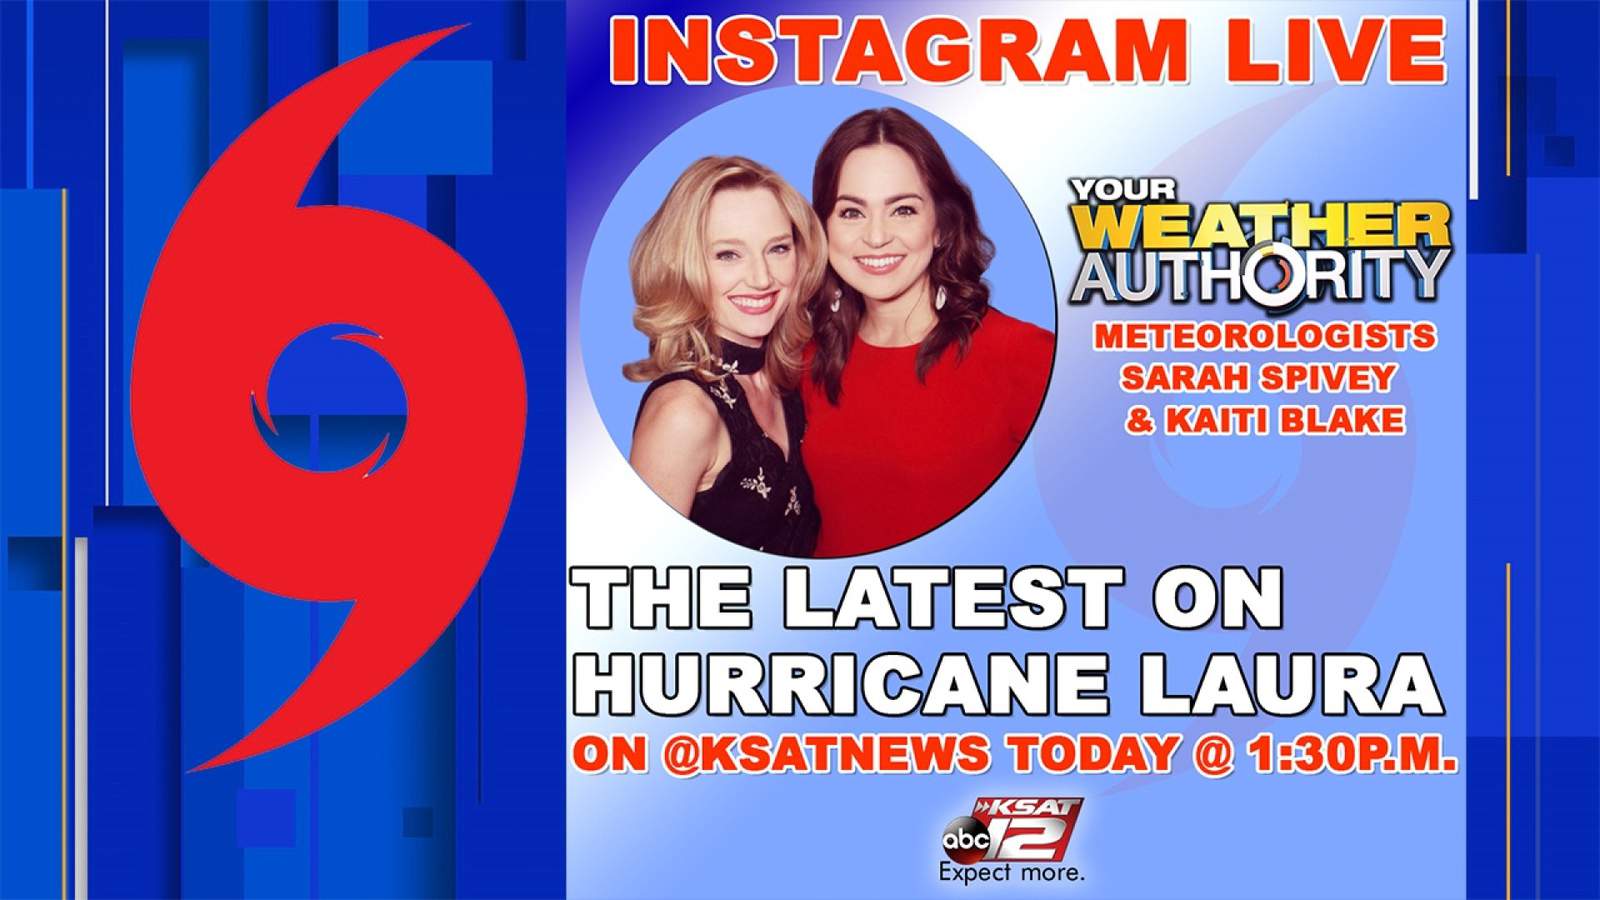 Weather Authority meteorologists Sarah Spivey & Kaiti Blake give an update on Hurricane Laura